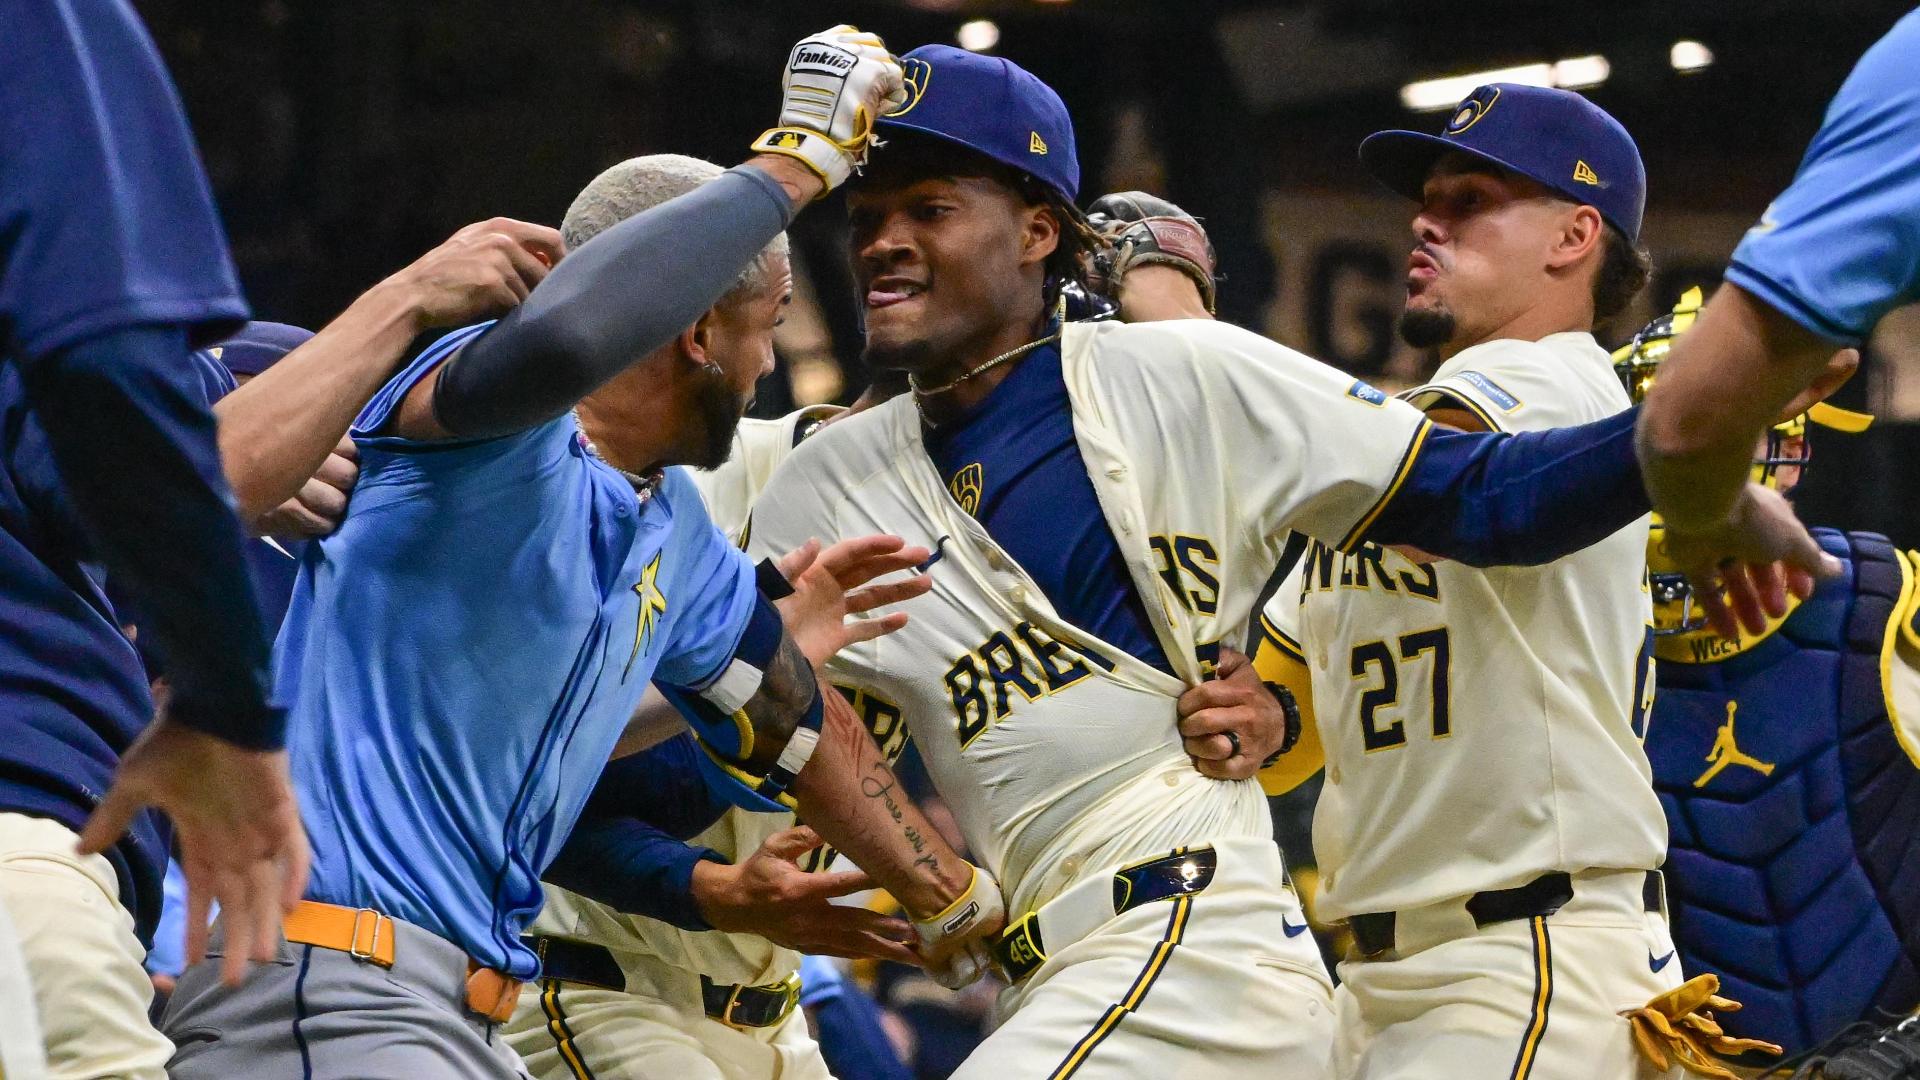 Adames powers Brewers past Rays 8-2  Uribe and Siri at center of wild brawl